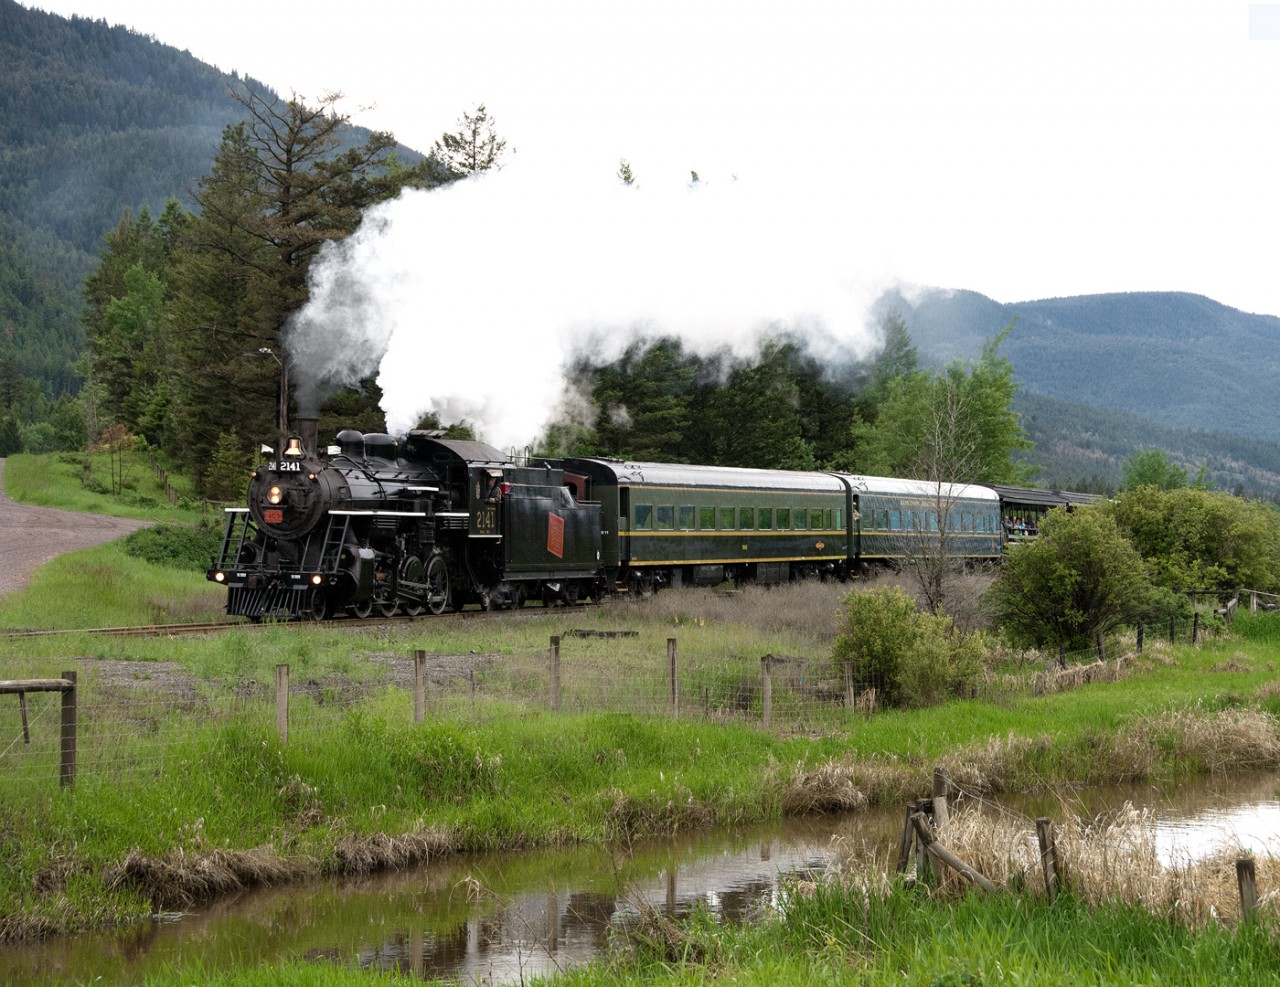 Kamloops Heritage Railway's ex CN 2-8-0 2141 with a Campbell Creek(Near Kamloops) to Armstrong BC excursion
Rolls along the Salmon River just west of the Village of Falkland on Kelowna Pacific Railwa's ex Canadian National Okanagan branch.